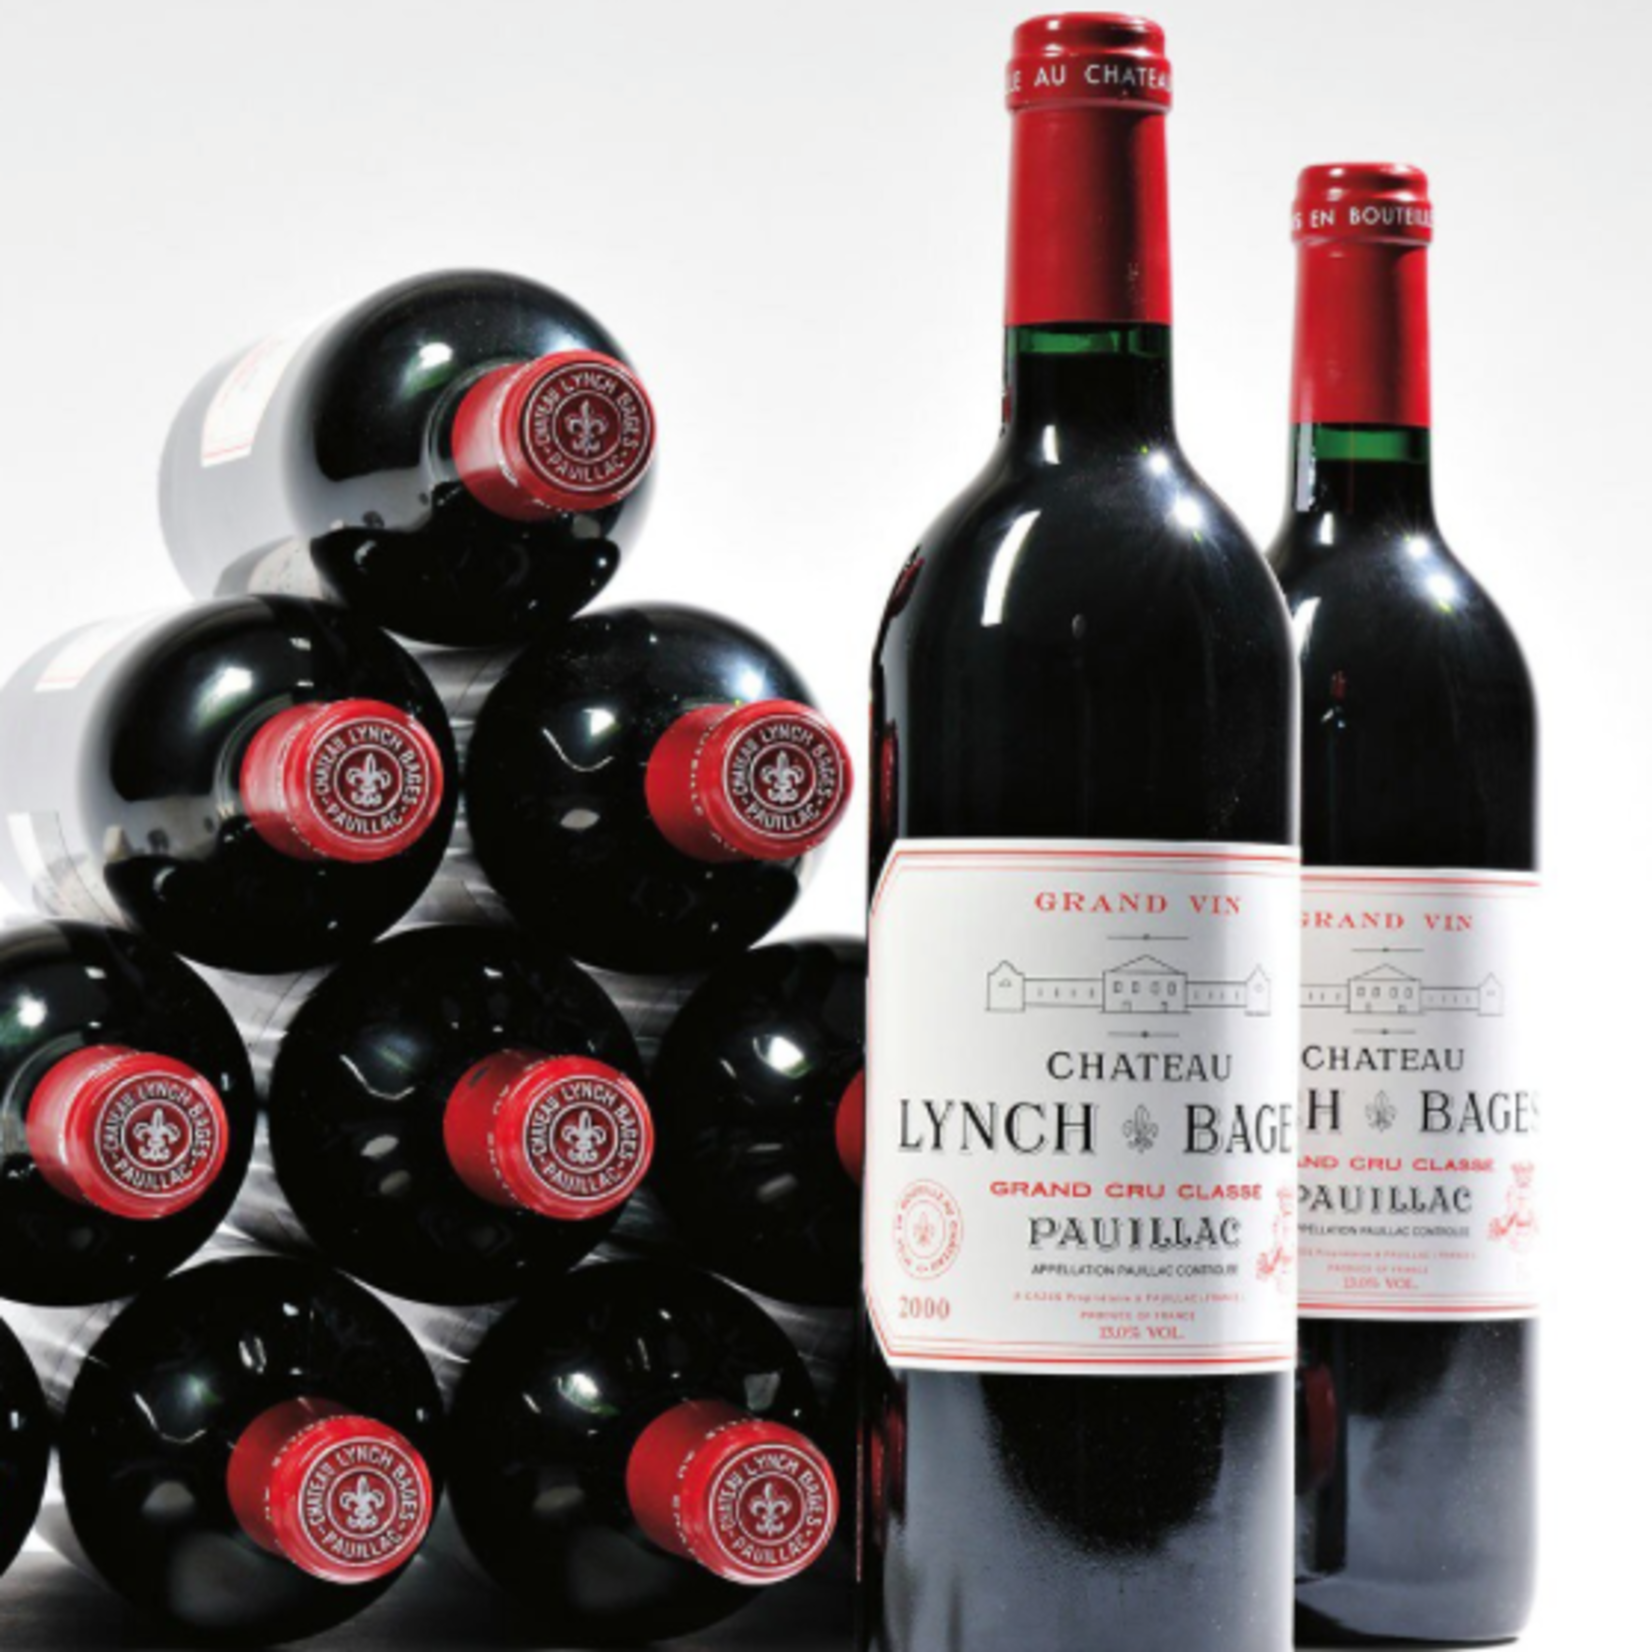 Wine Chateau Lynch Bages 2000